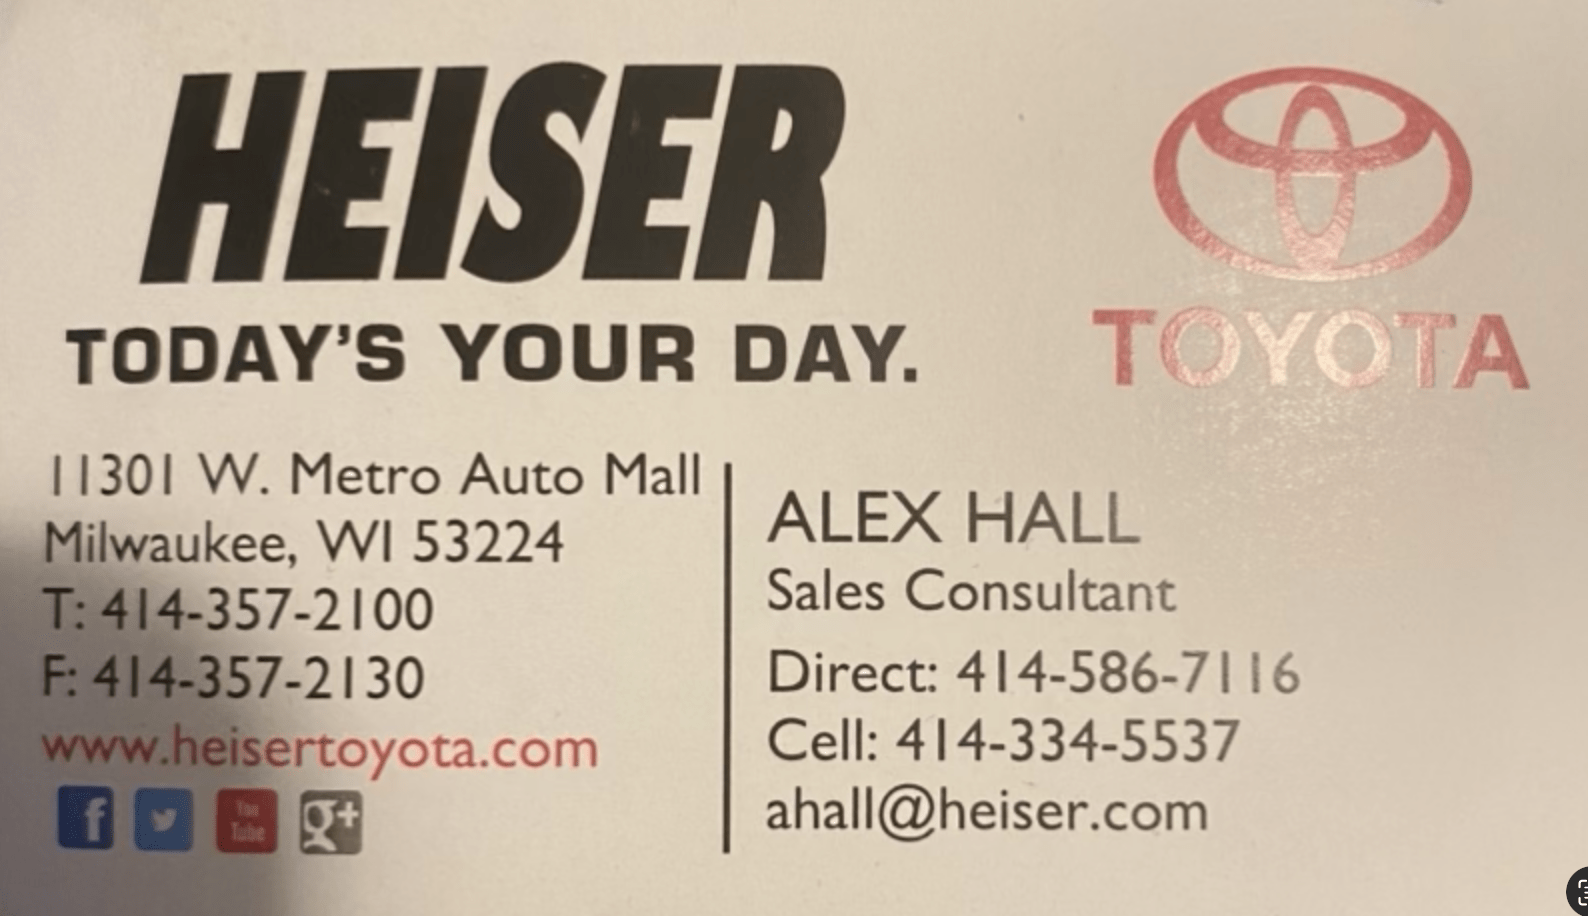 Alex Hall Sales Consultant Business Card